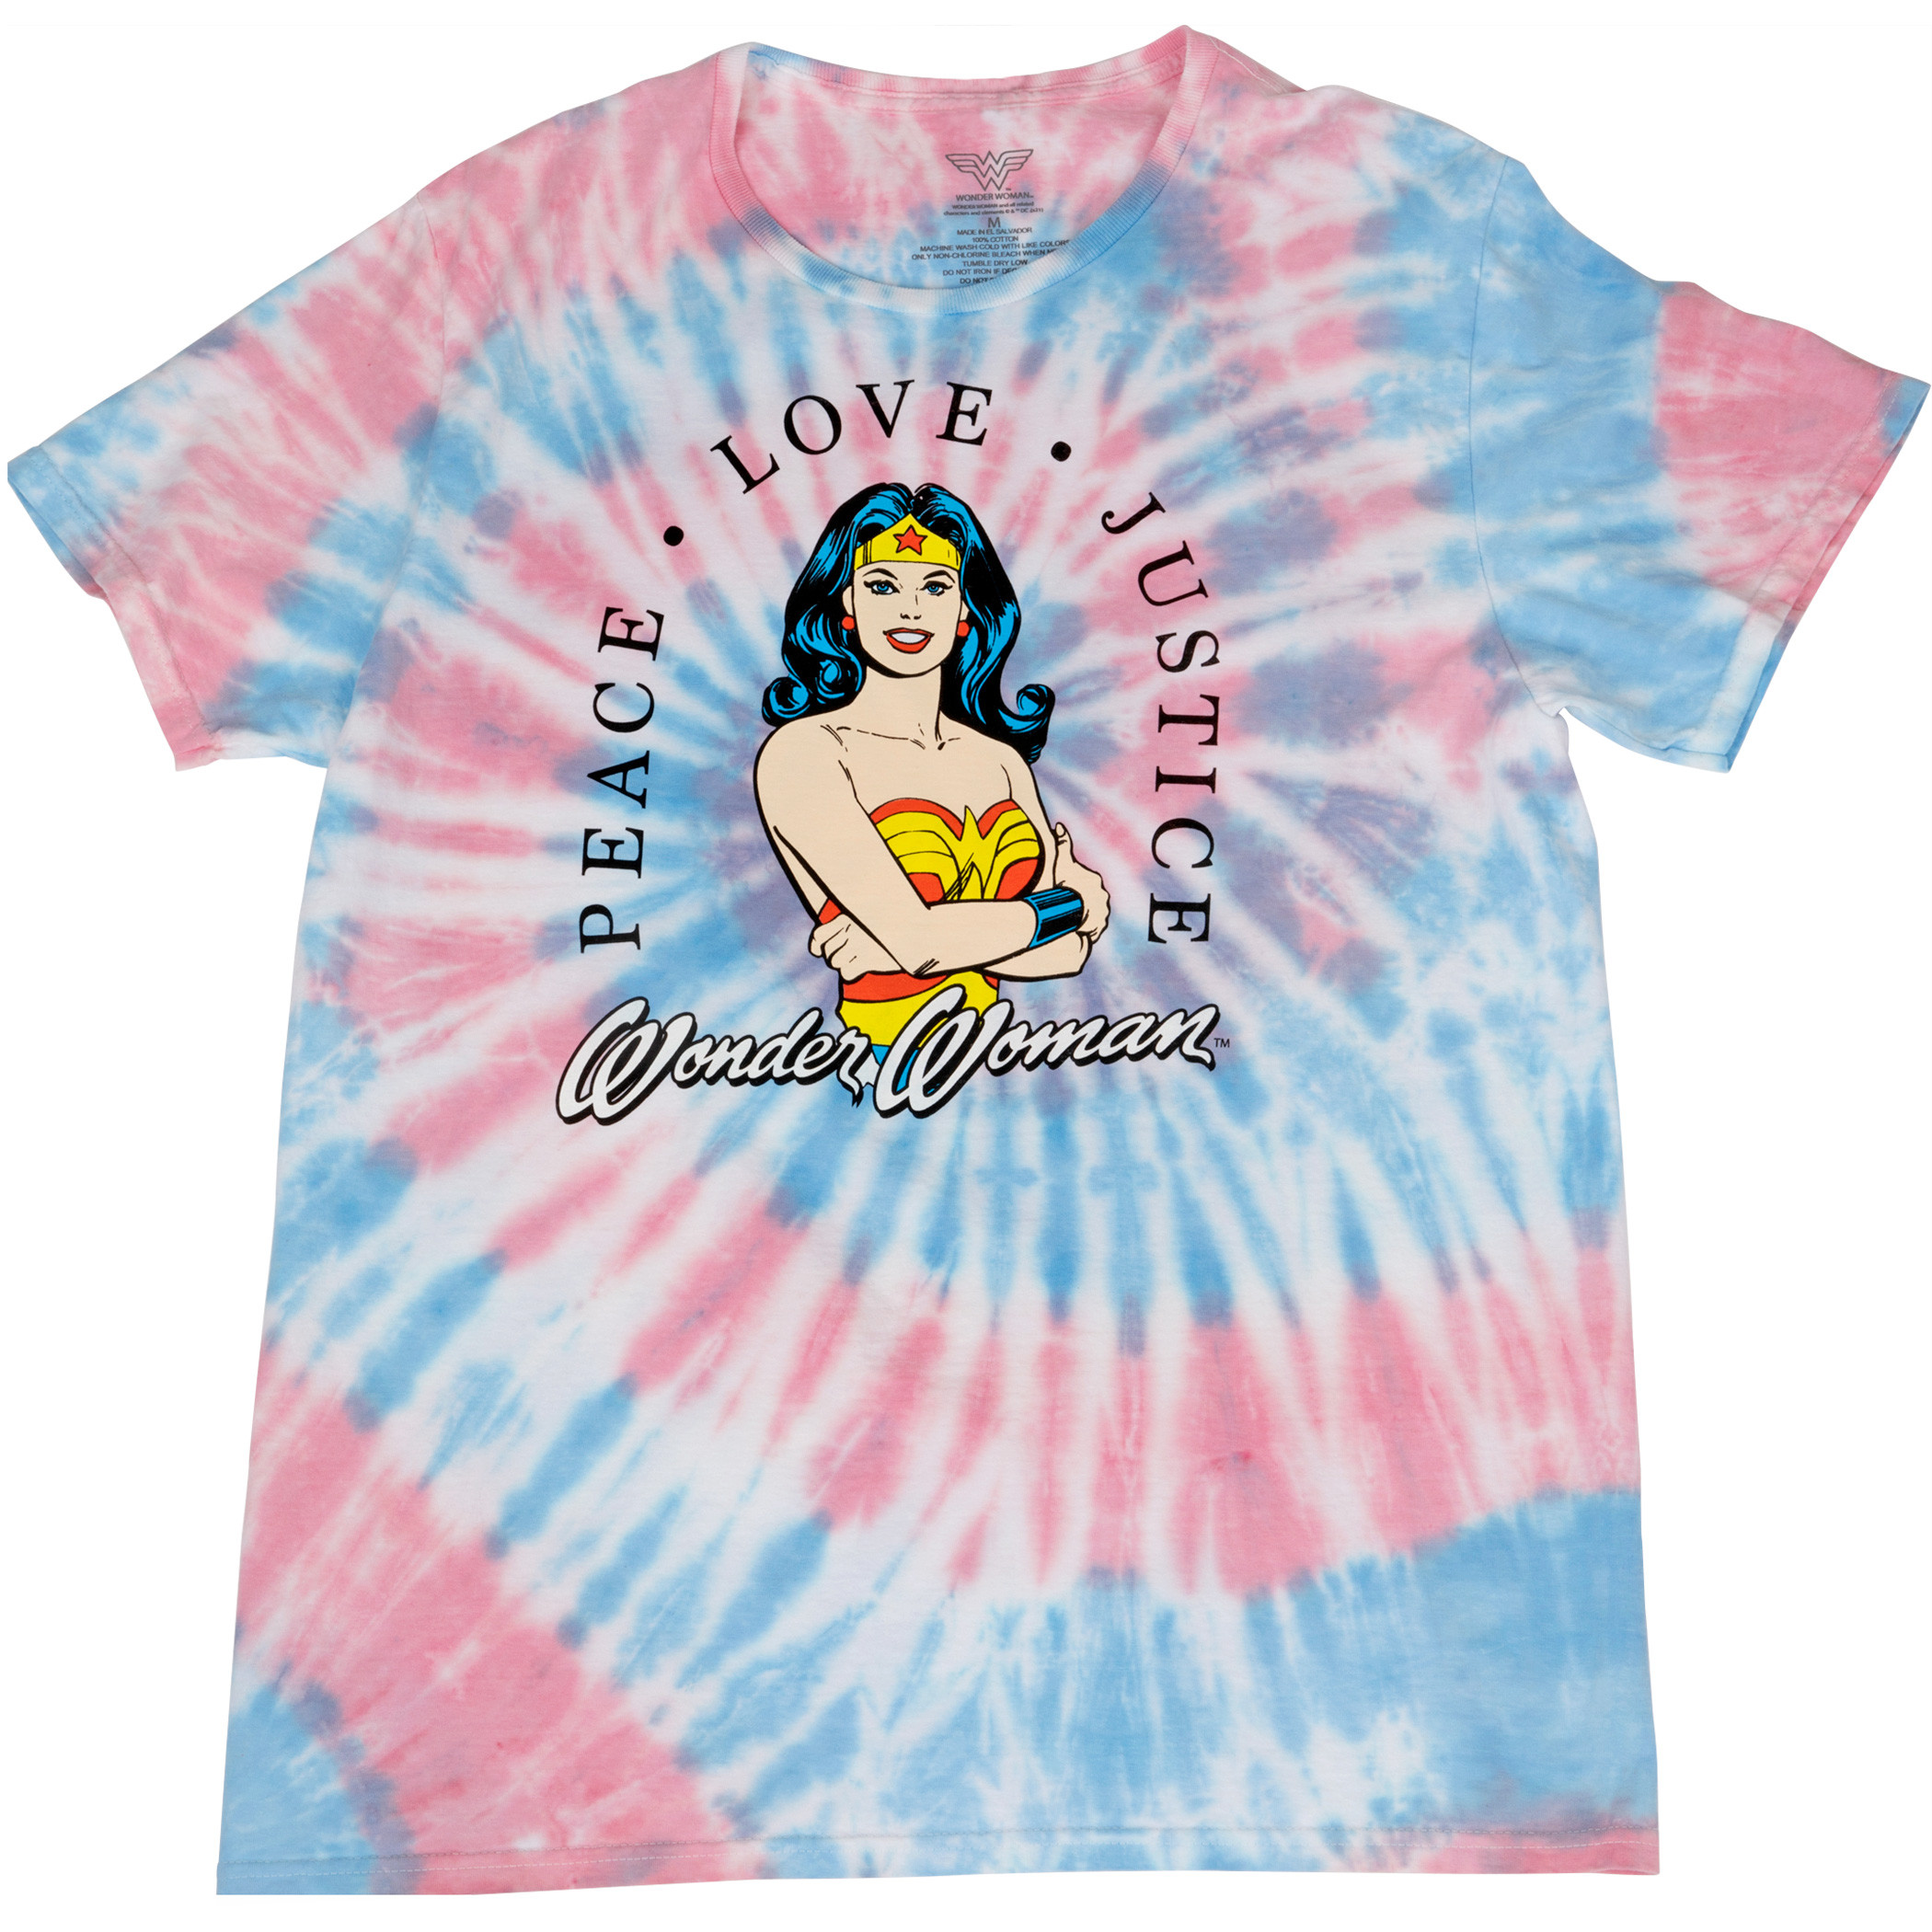 Wonder Woman Character Peace Love and Justice Tie Dye T-Shirt